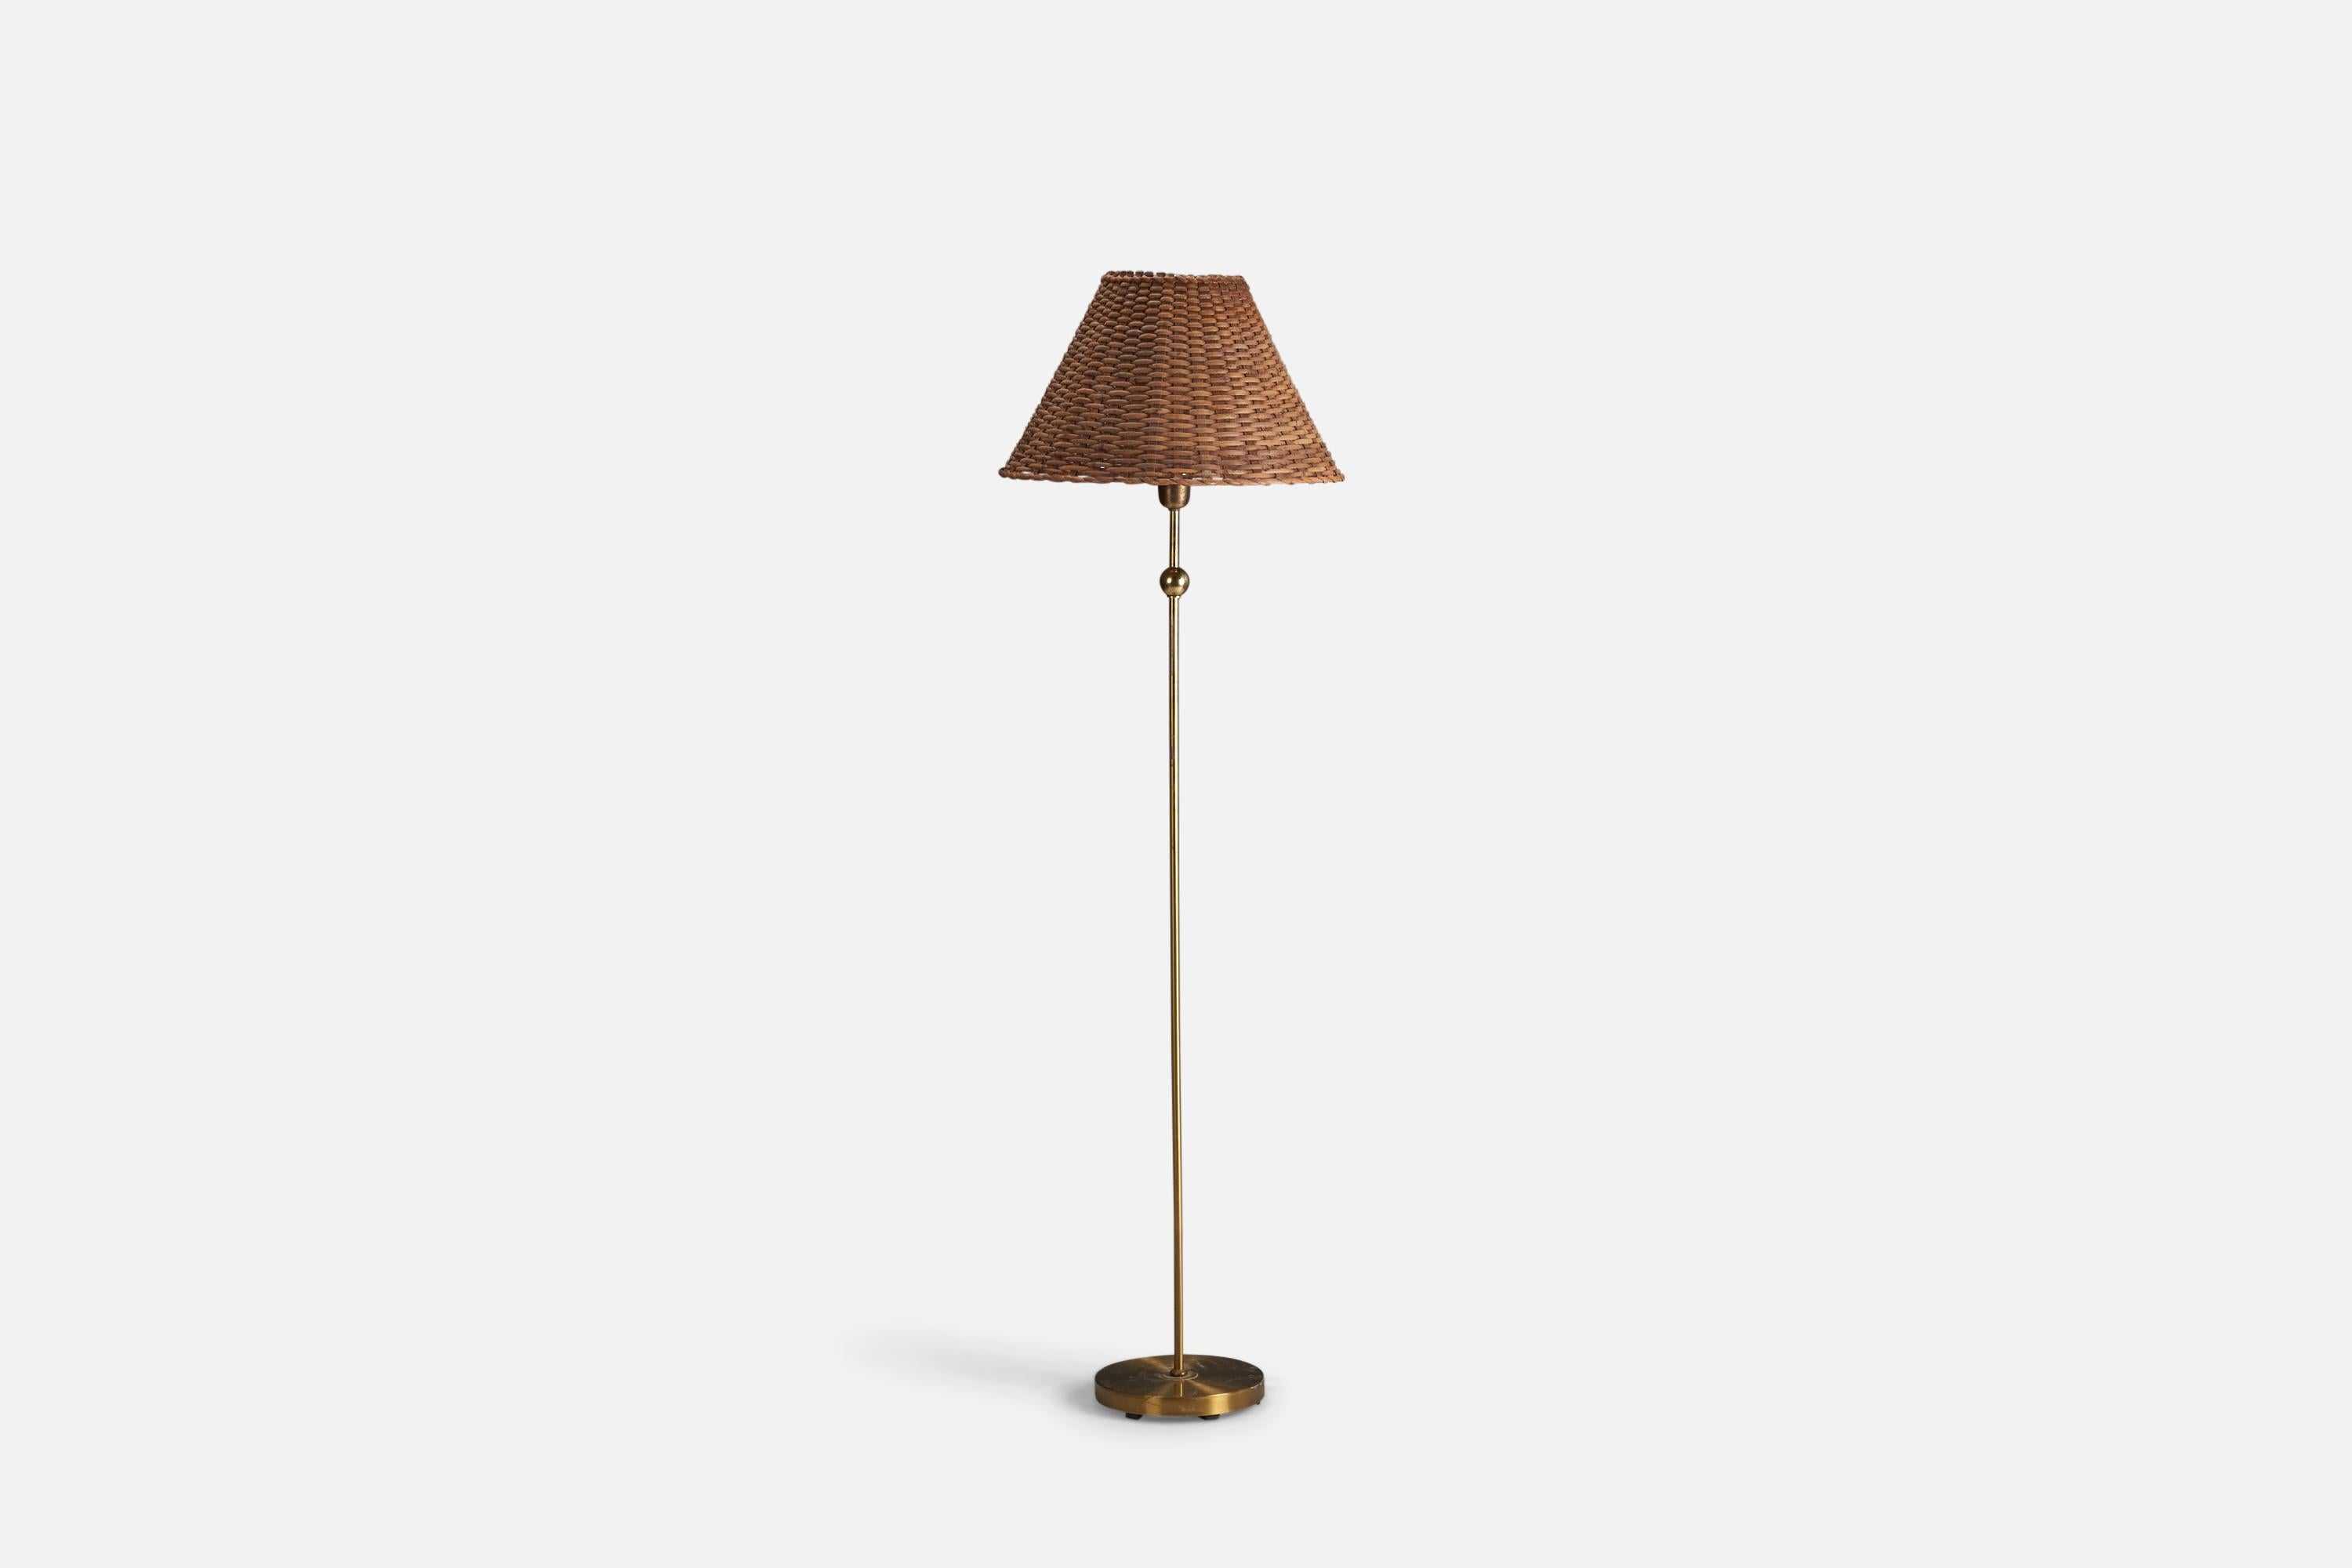 A brass and rattan floor lamp designed and produced by Einar Bäckström, Sweden, 1950s.

Socket takes standard E-26 medium base bulb.

There is no maximum wattage stated on the fixture.